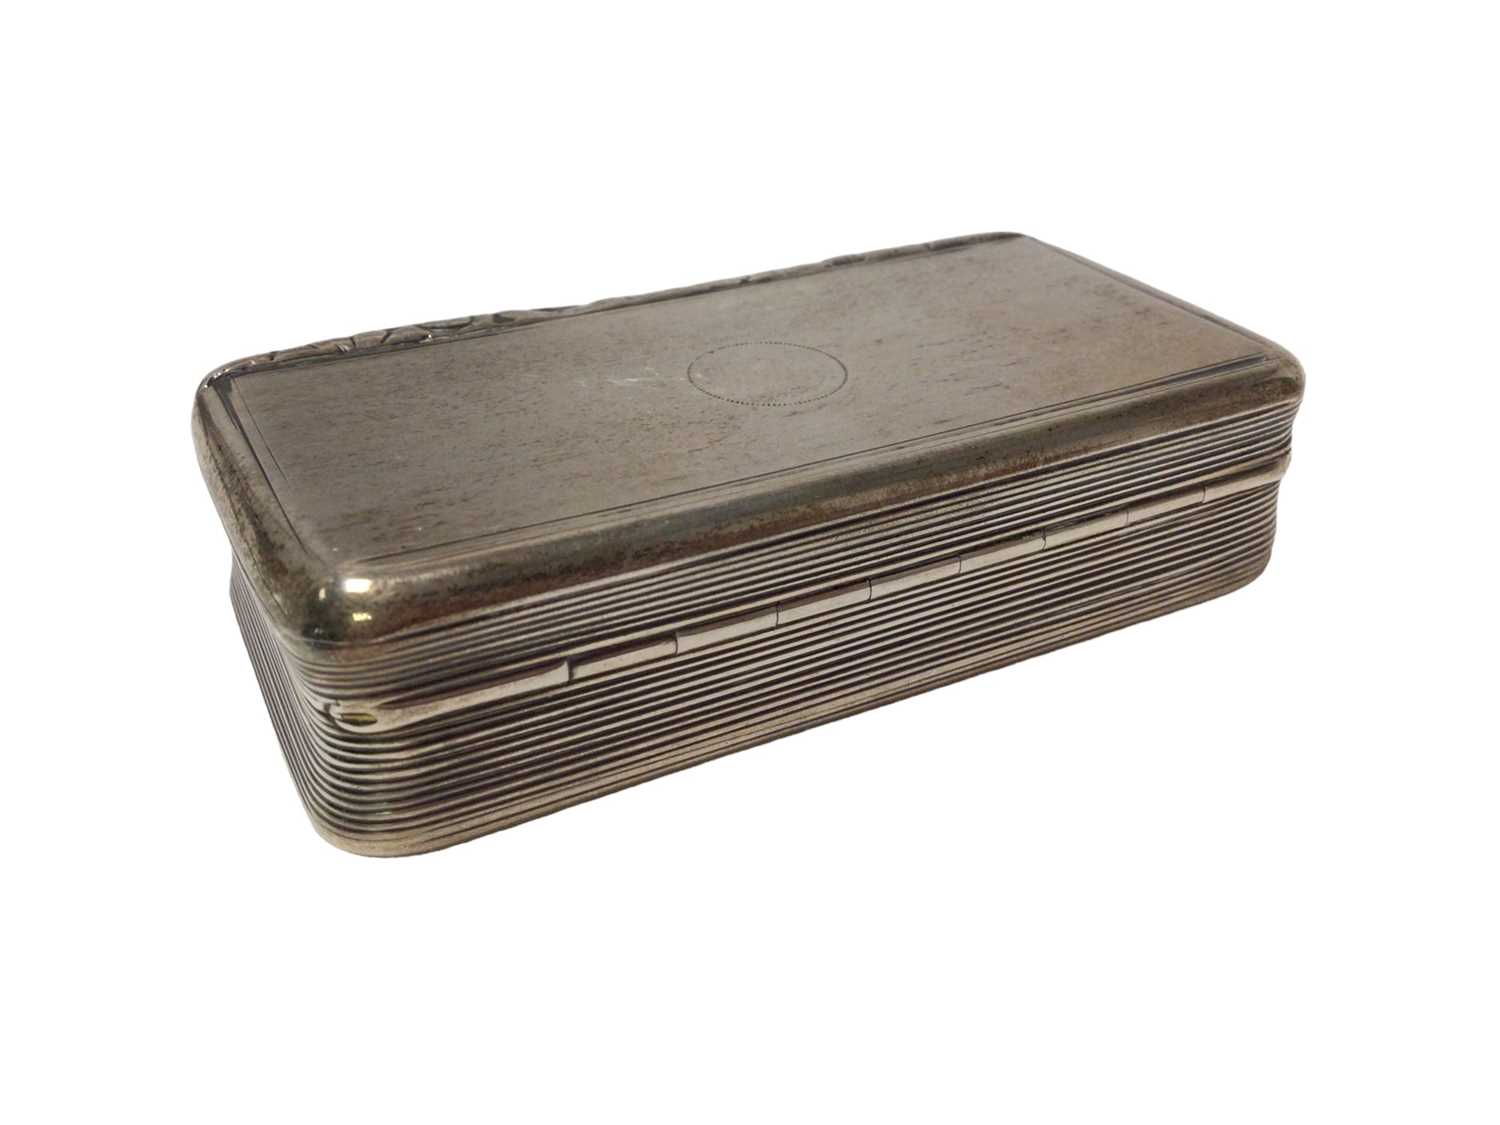 George III silver snuff box of rectangular form, with engine turned decoration, - Image 2 of 3